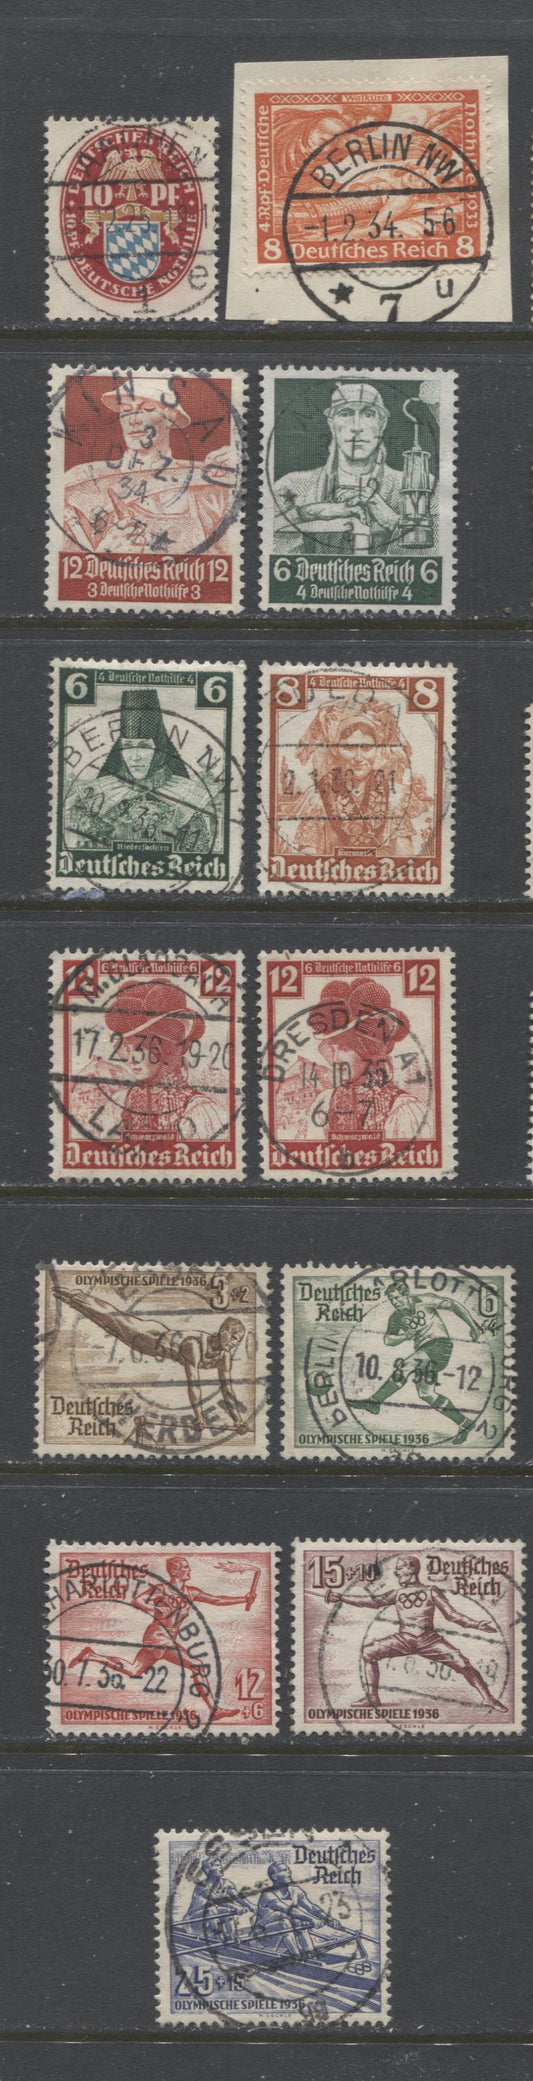 Lot 456 Germany SC#B13/B88 1925-1936 Arms - Olympics Semi-Postal Issues, All With SON Town Cancels, 13 VF Used Singles, Click on Listing to See ALL Pictures, 2022 Scott Classic Cat. $18.95